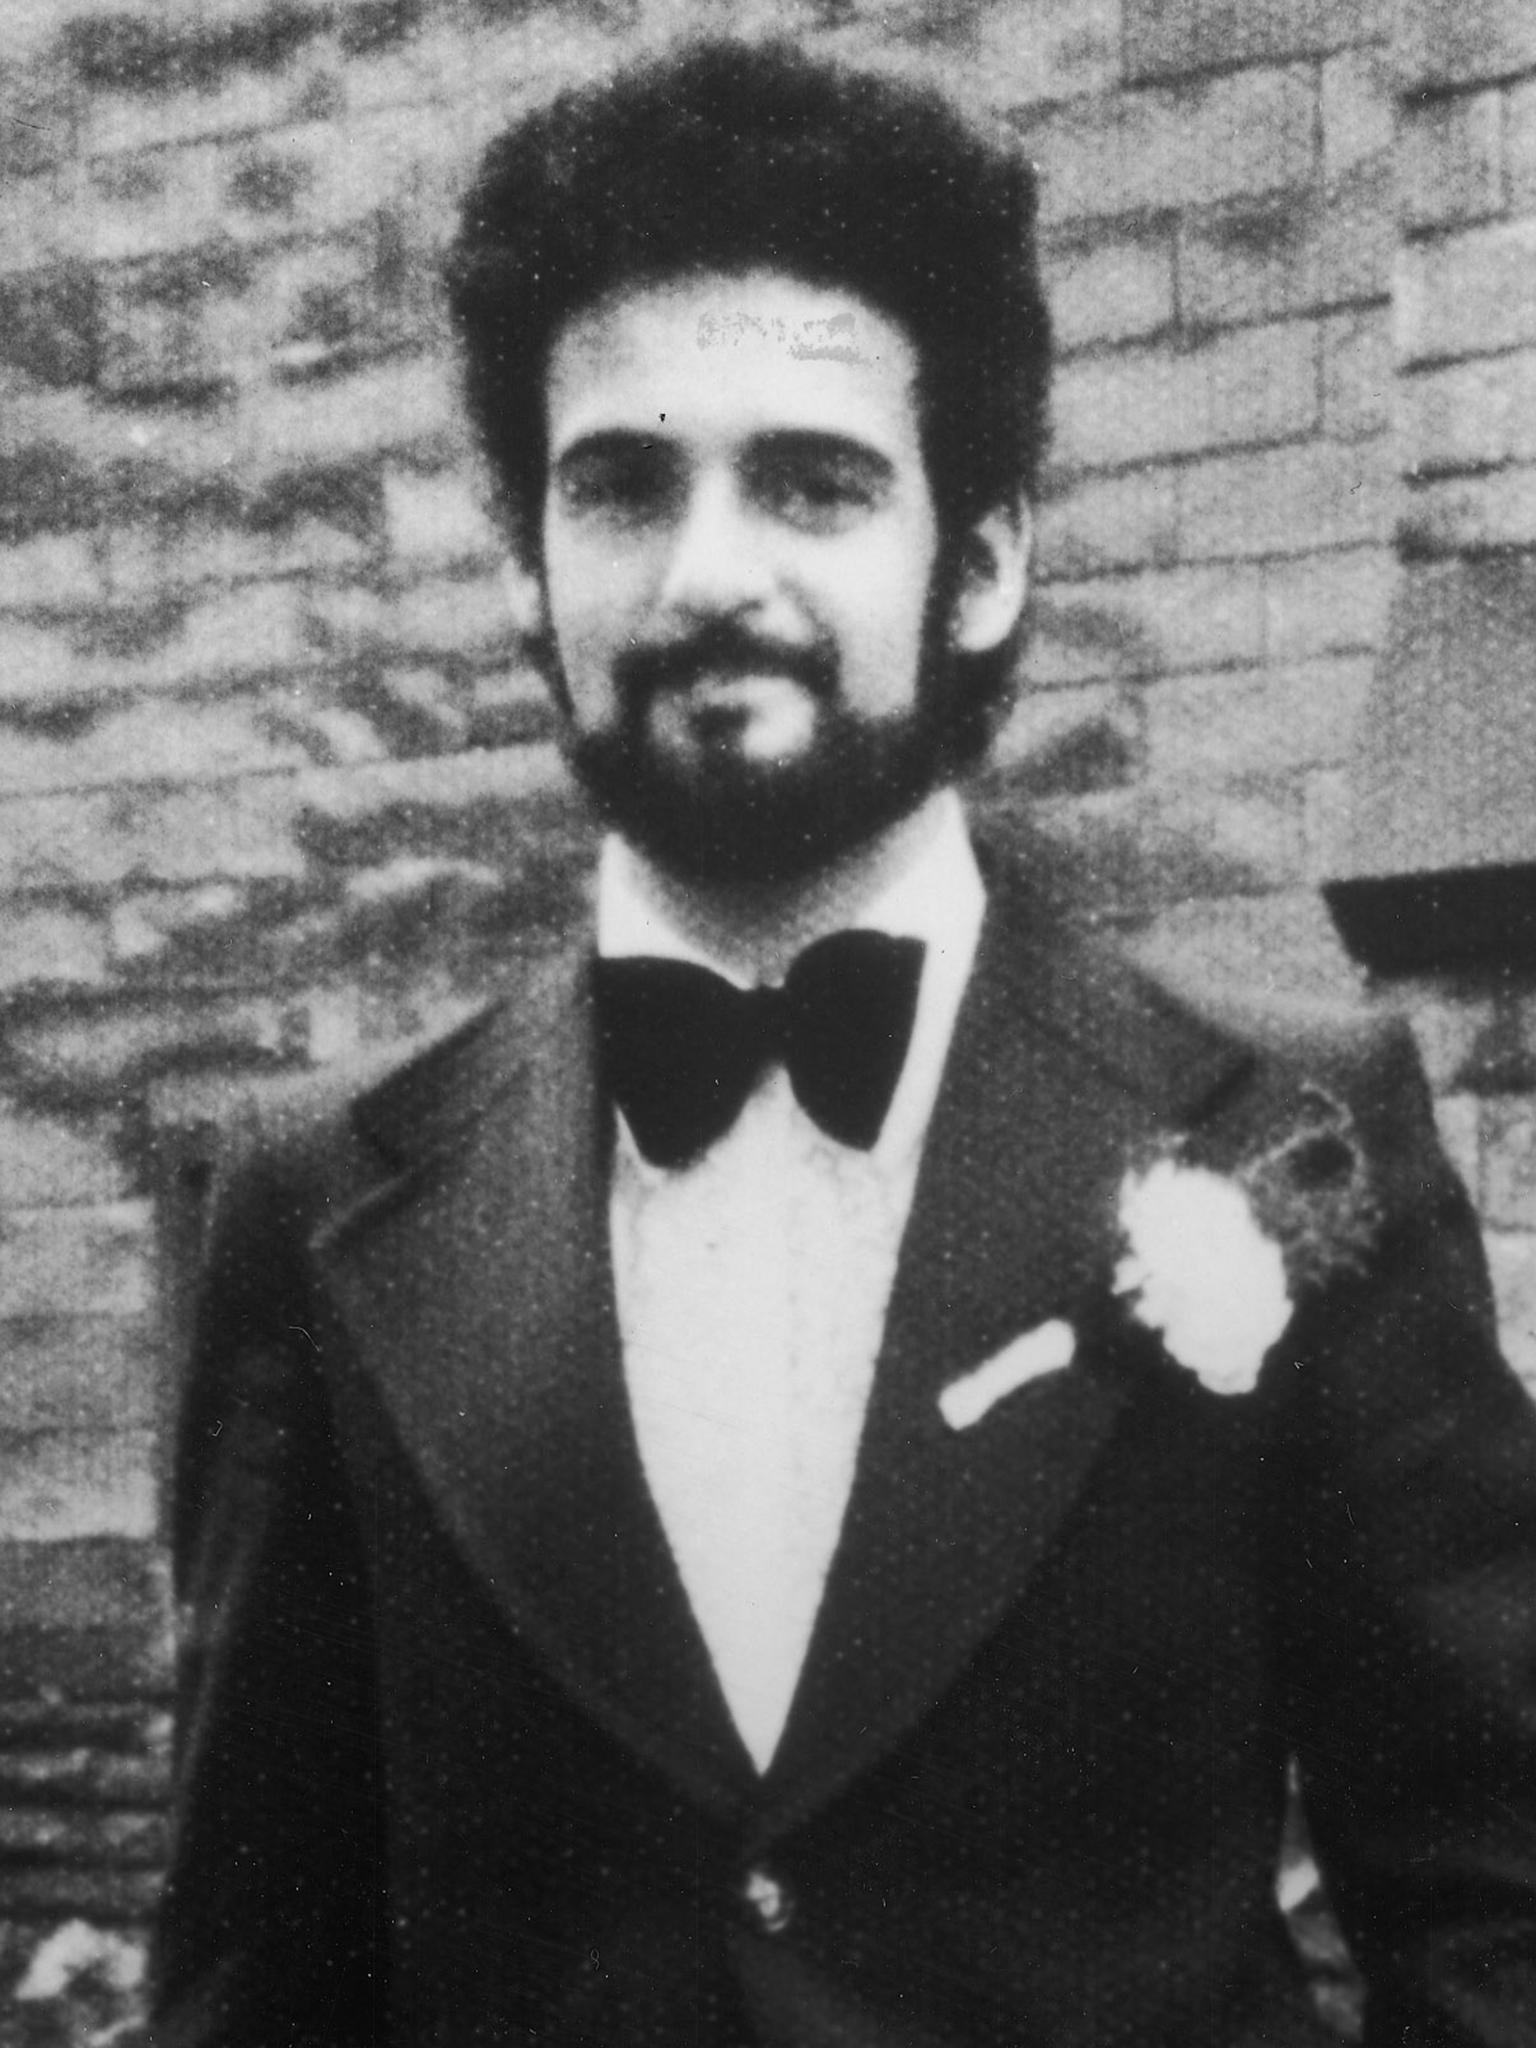 Three of Peter Sutcliffe’s 13 victims were killed in his home city